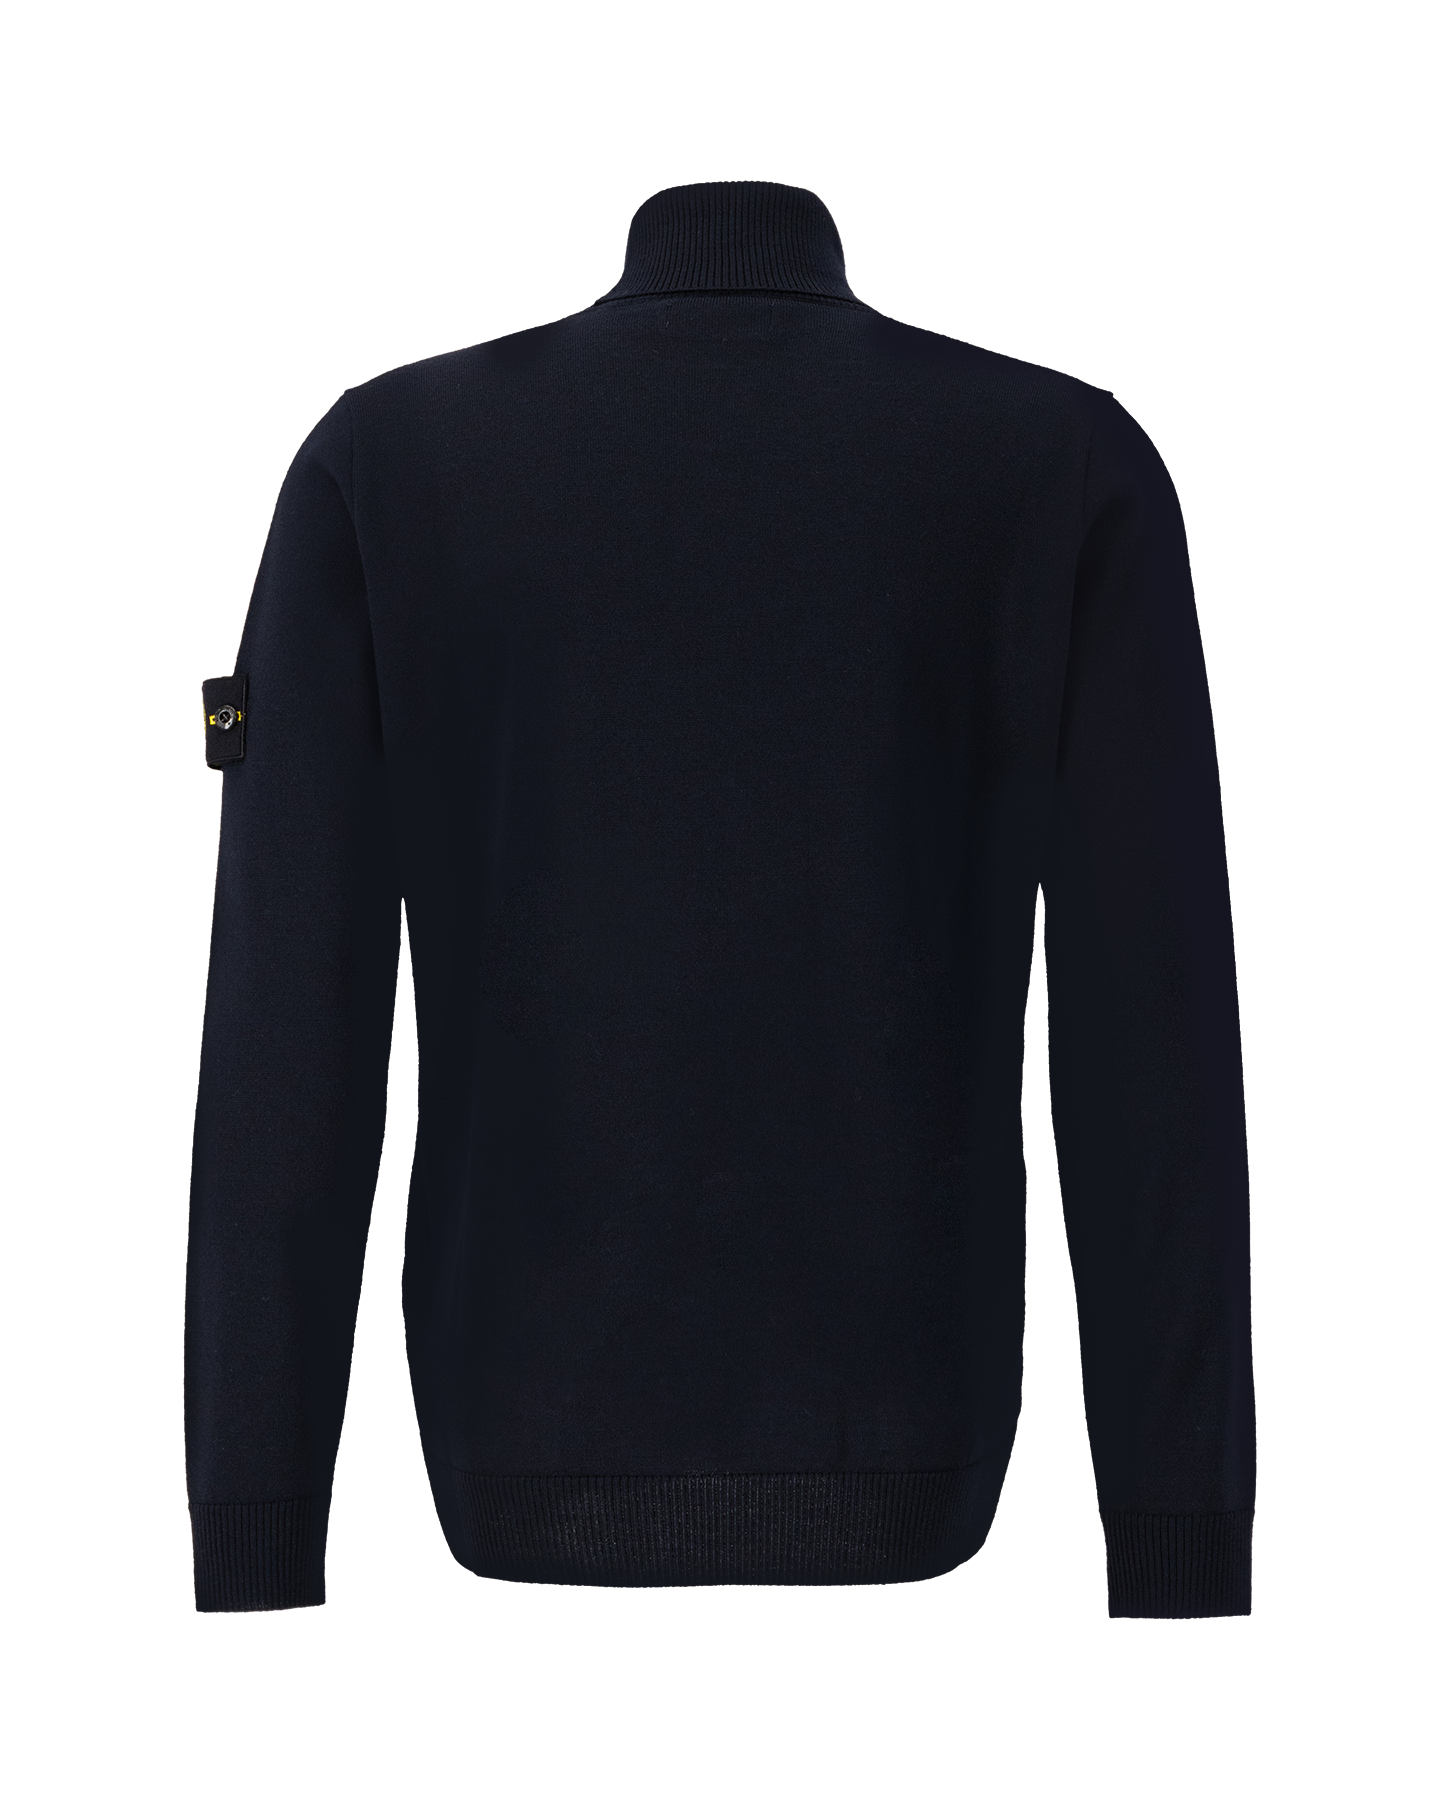 STONE ISLAND: sweater for man - Beige  Stone Island sweater 525C4 online  at